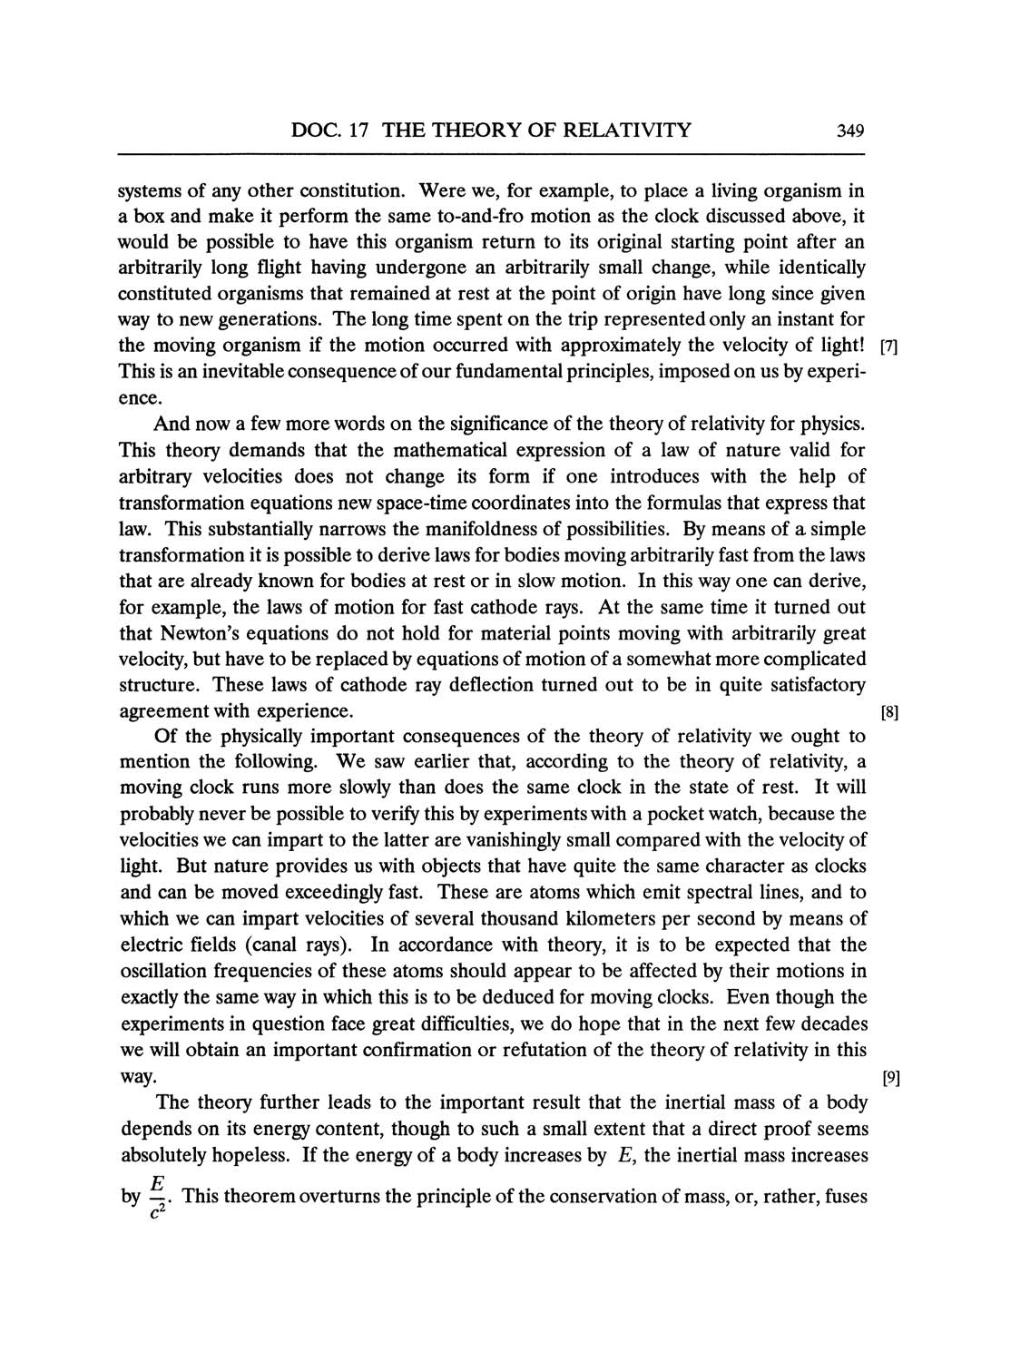 Volume 3: The Swiss Years: Writings 1909-1911 (English translation supplement) page 349